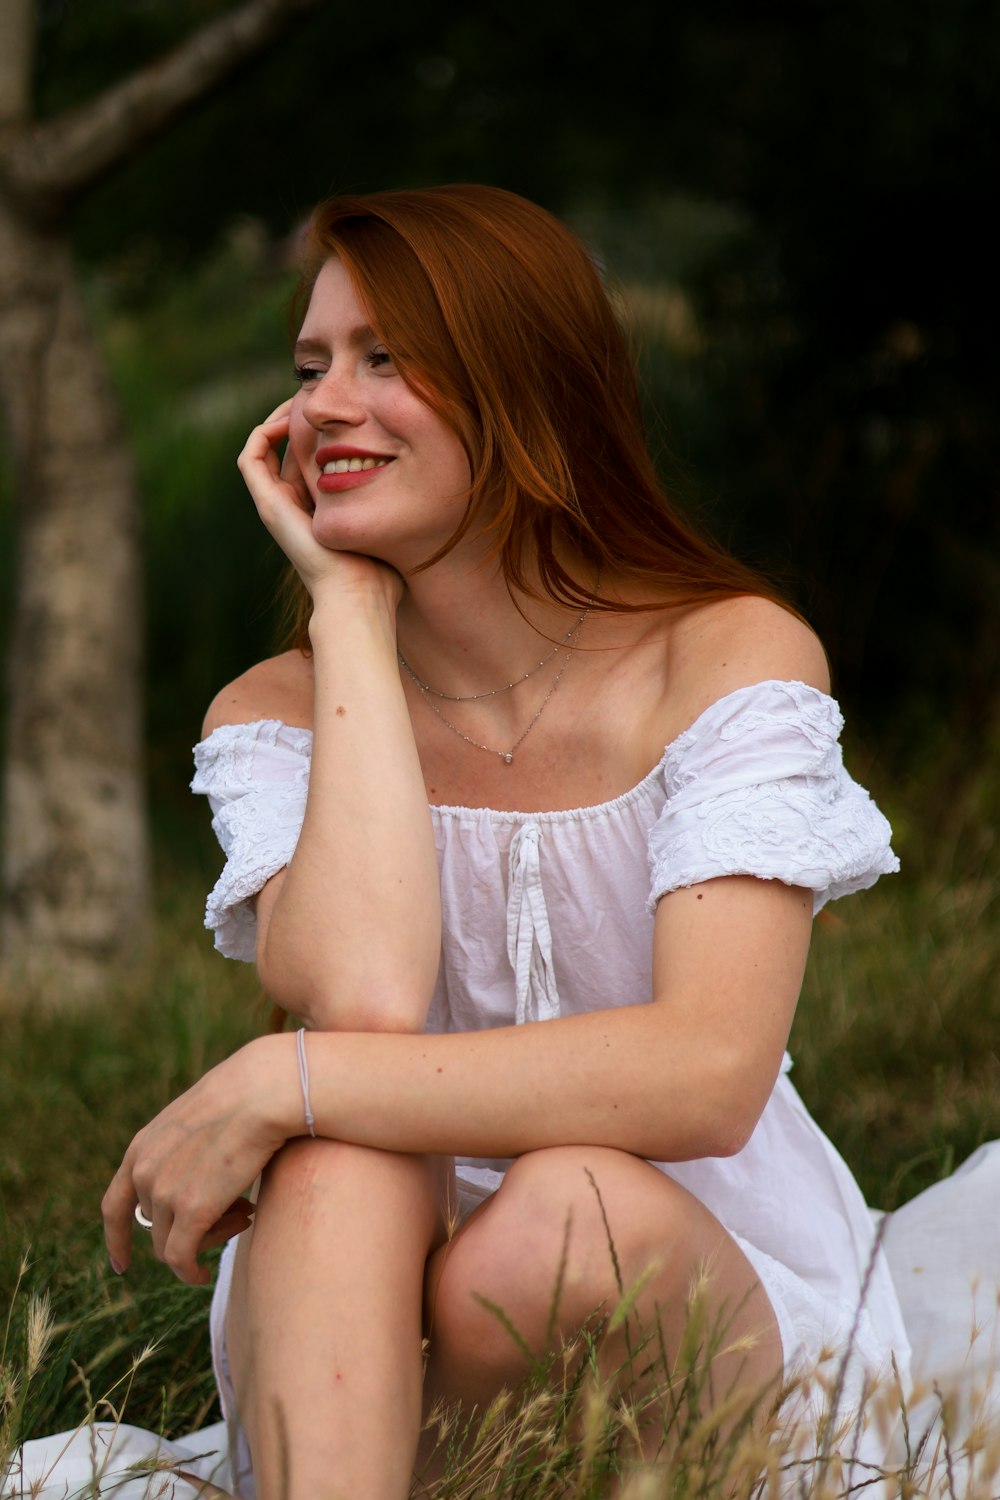 a woman in a white dress is sitting in the grass